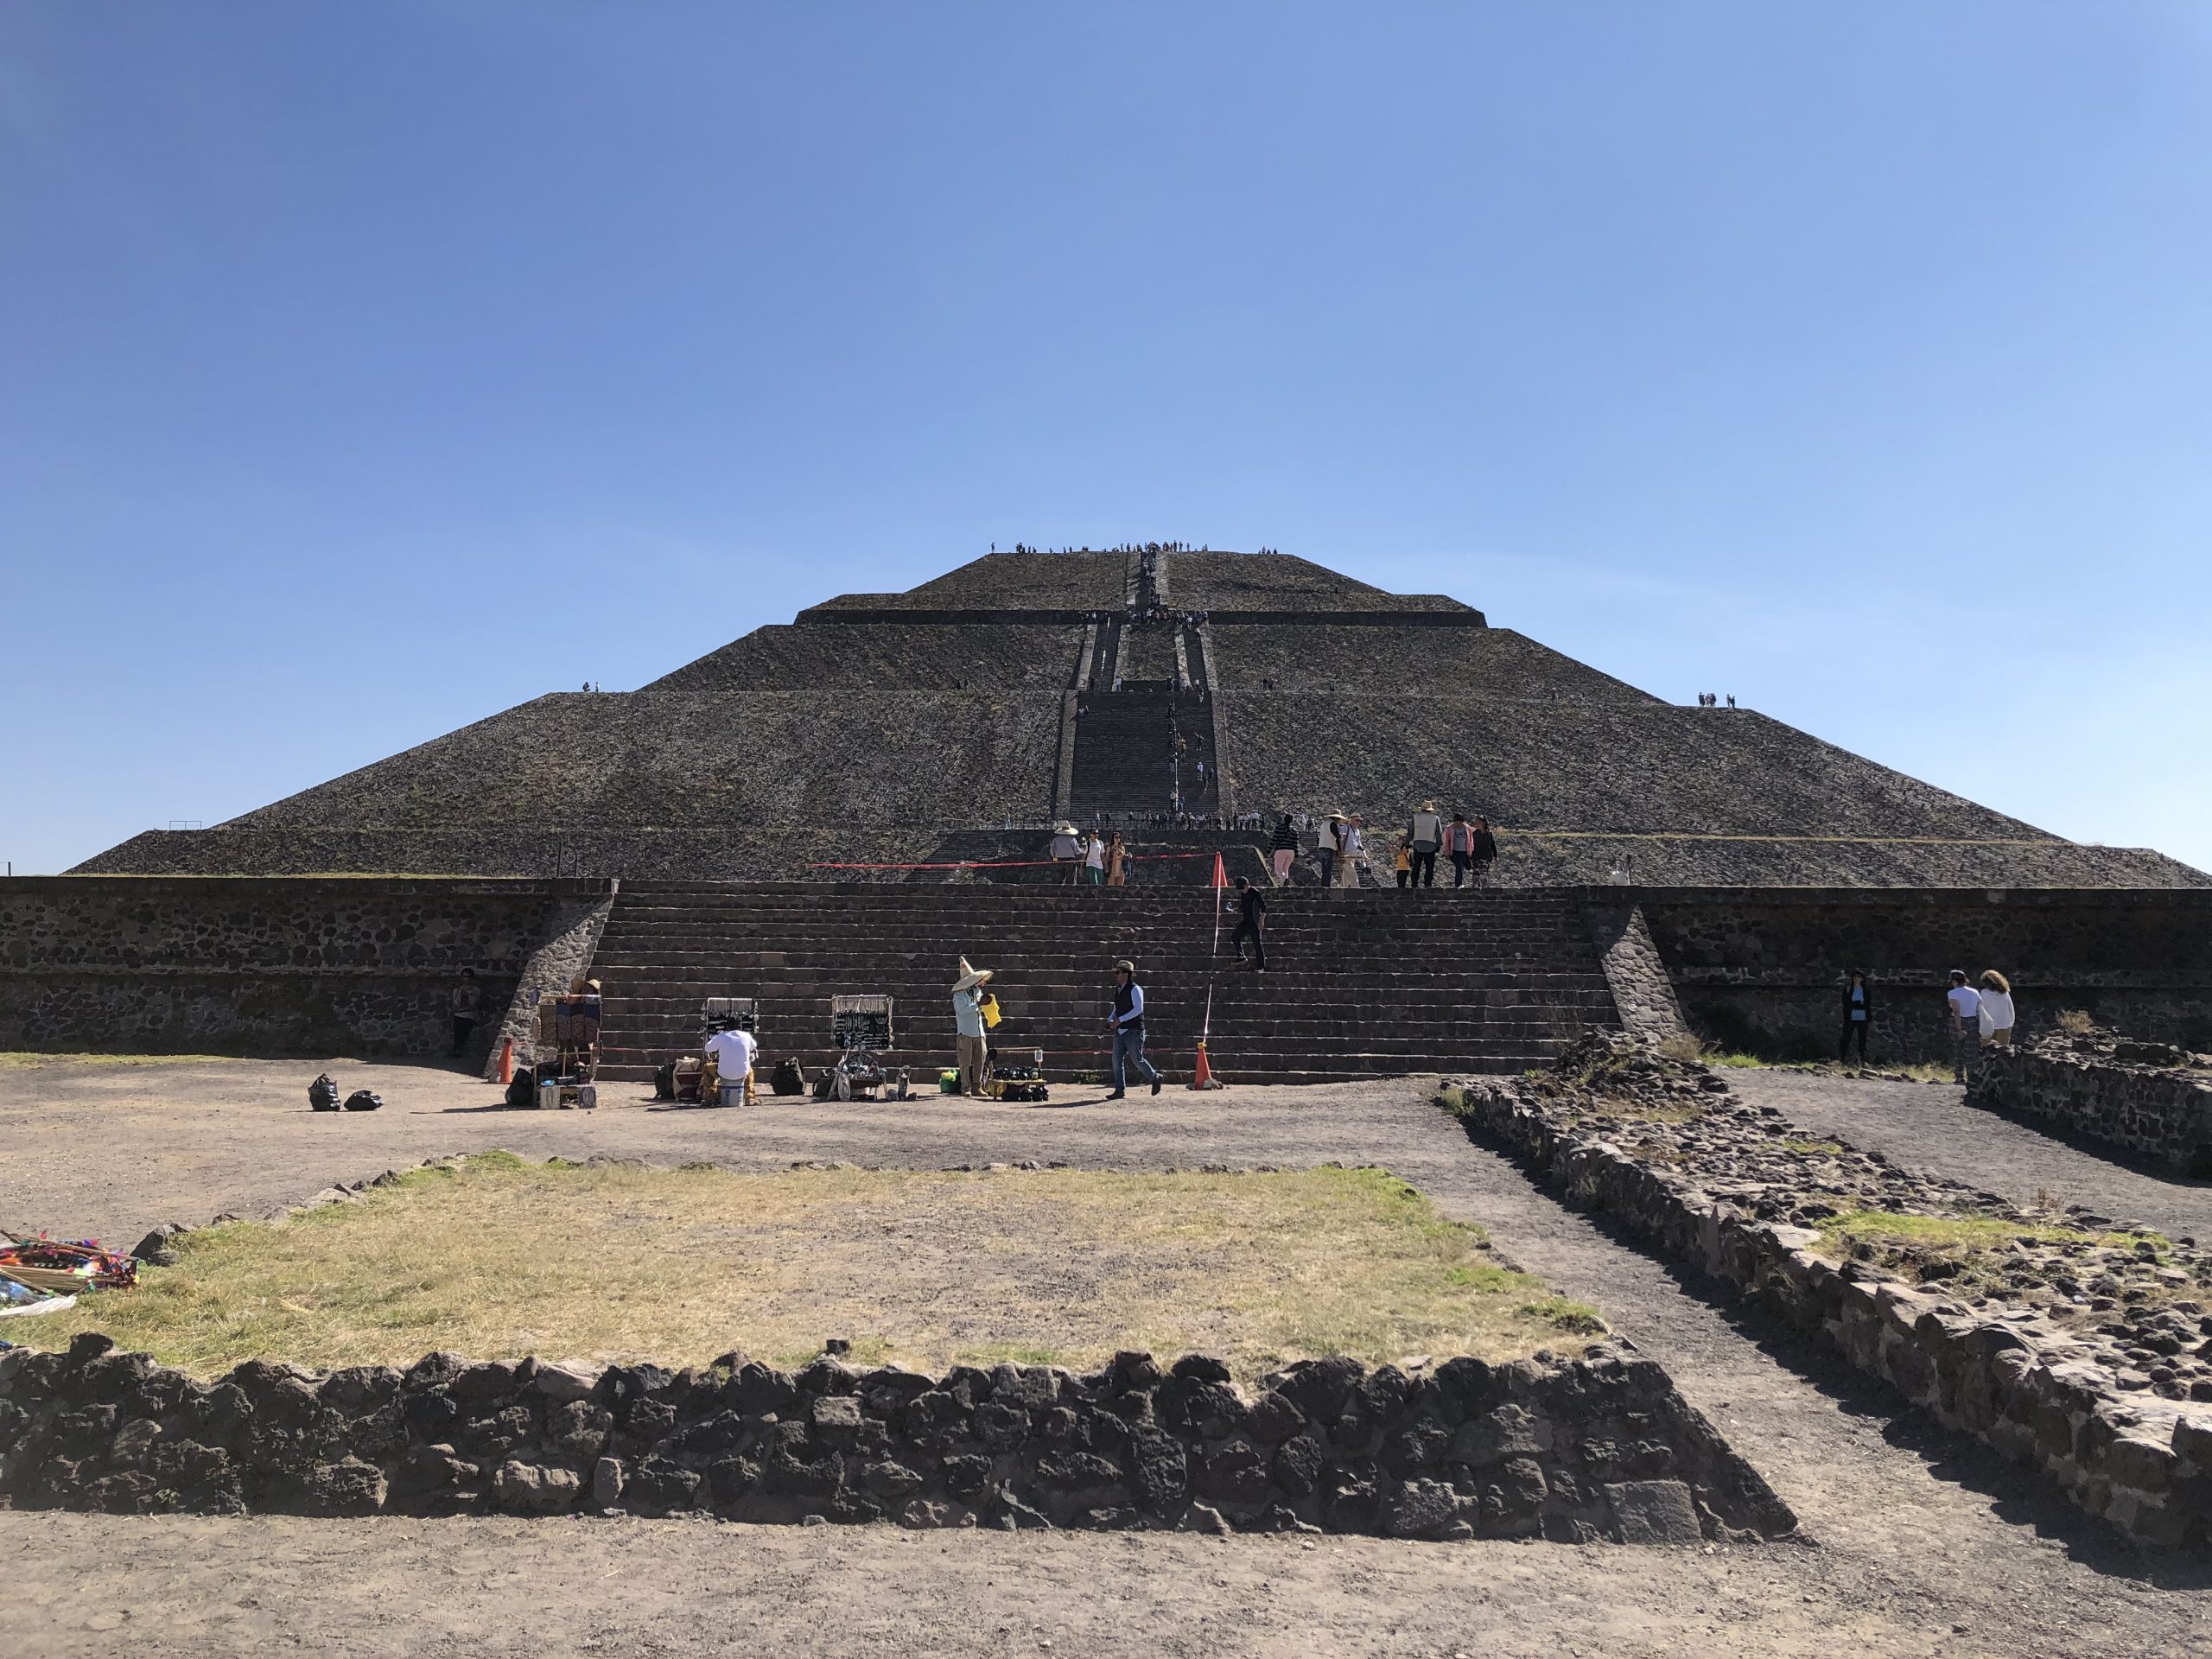 The pyramid of the sun in Teotihuacán